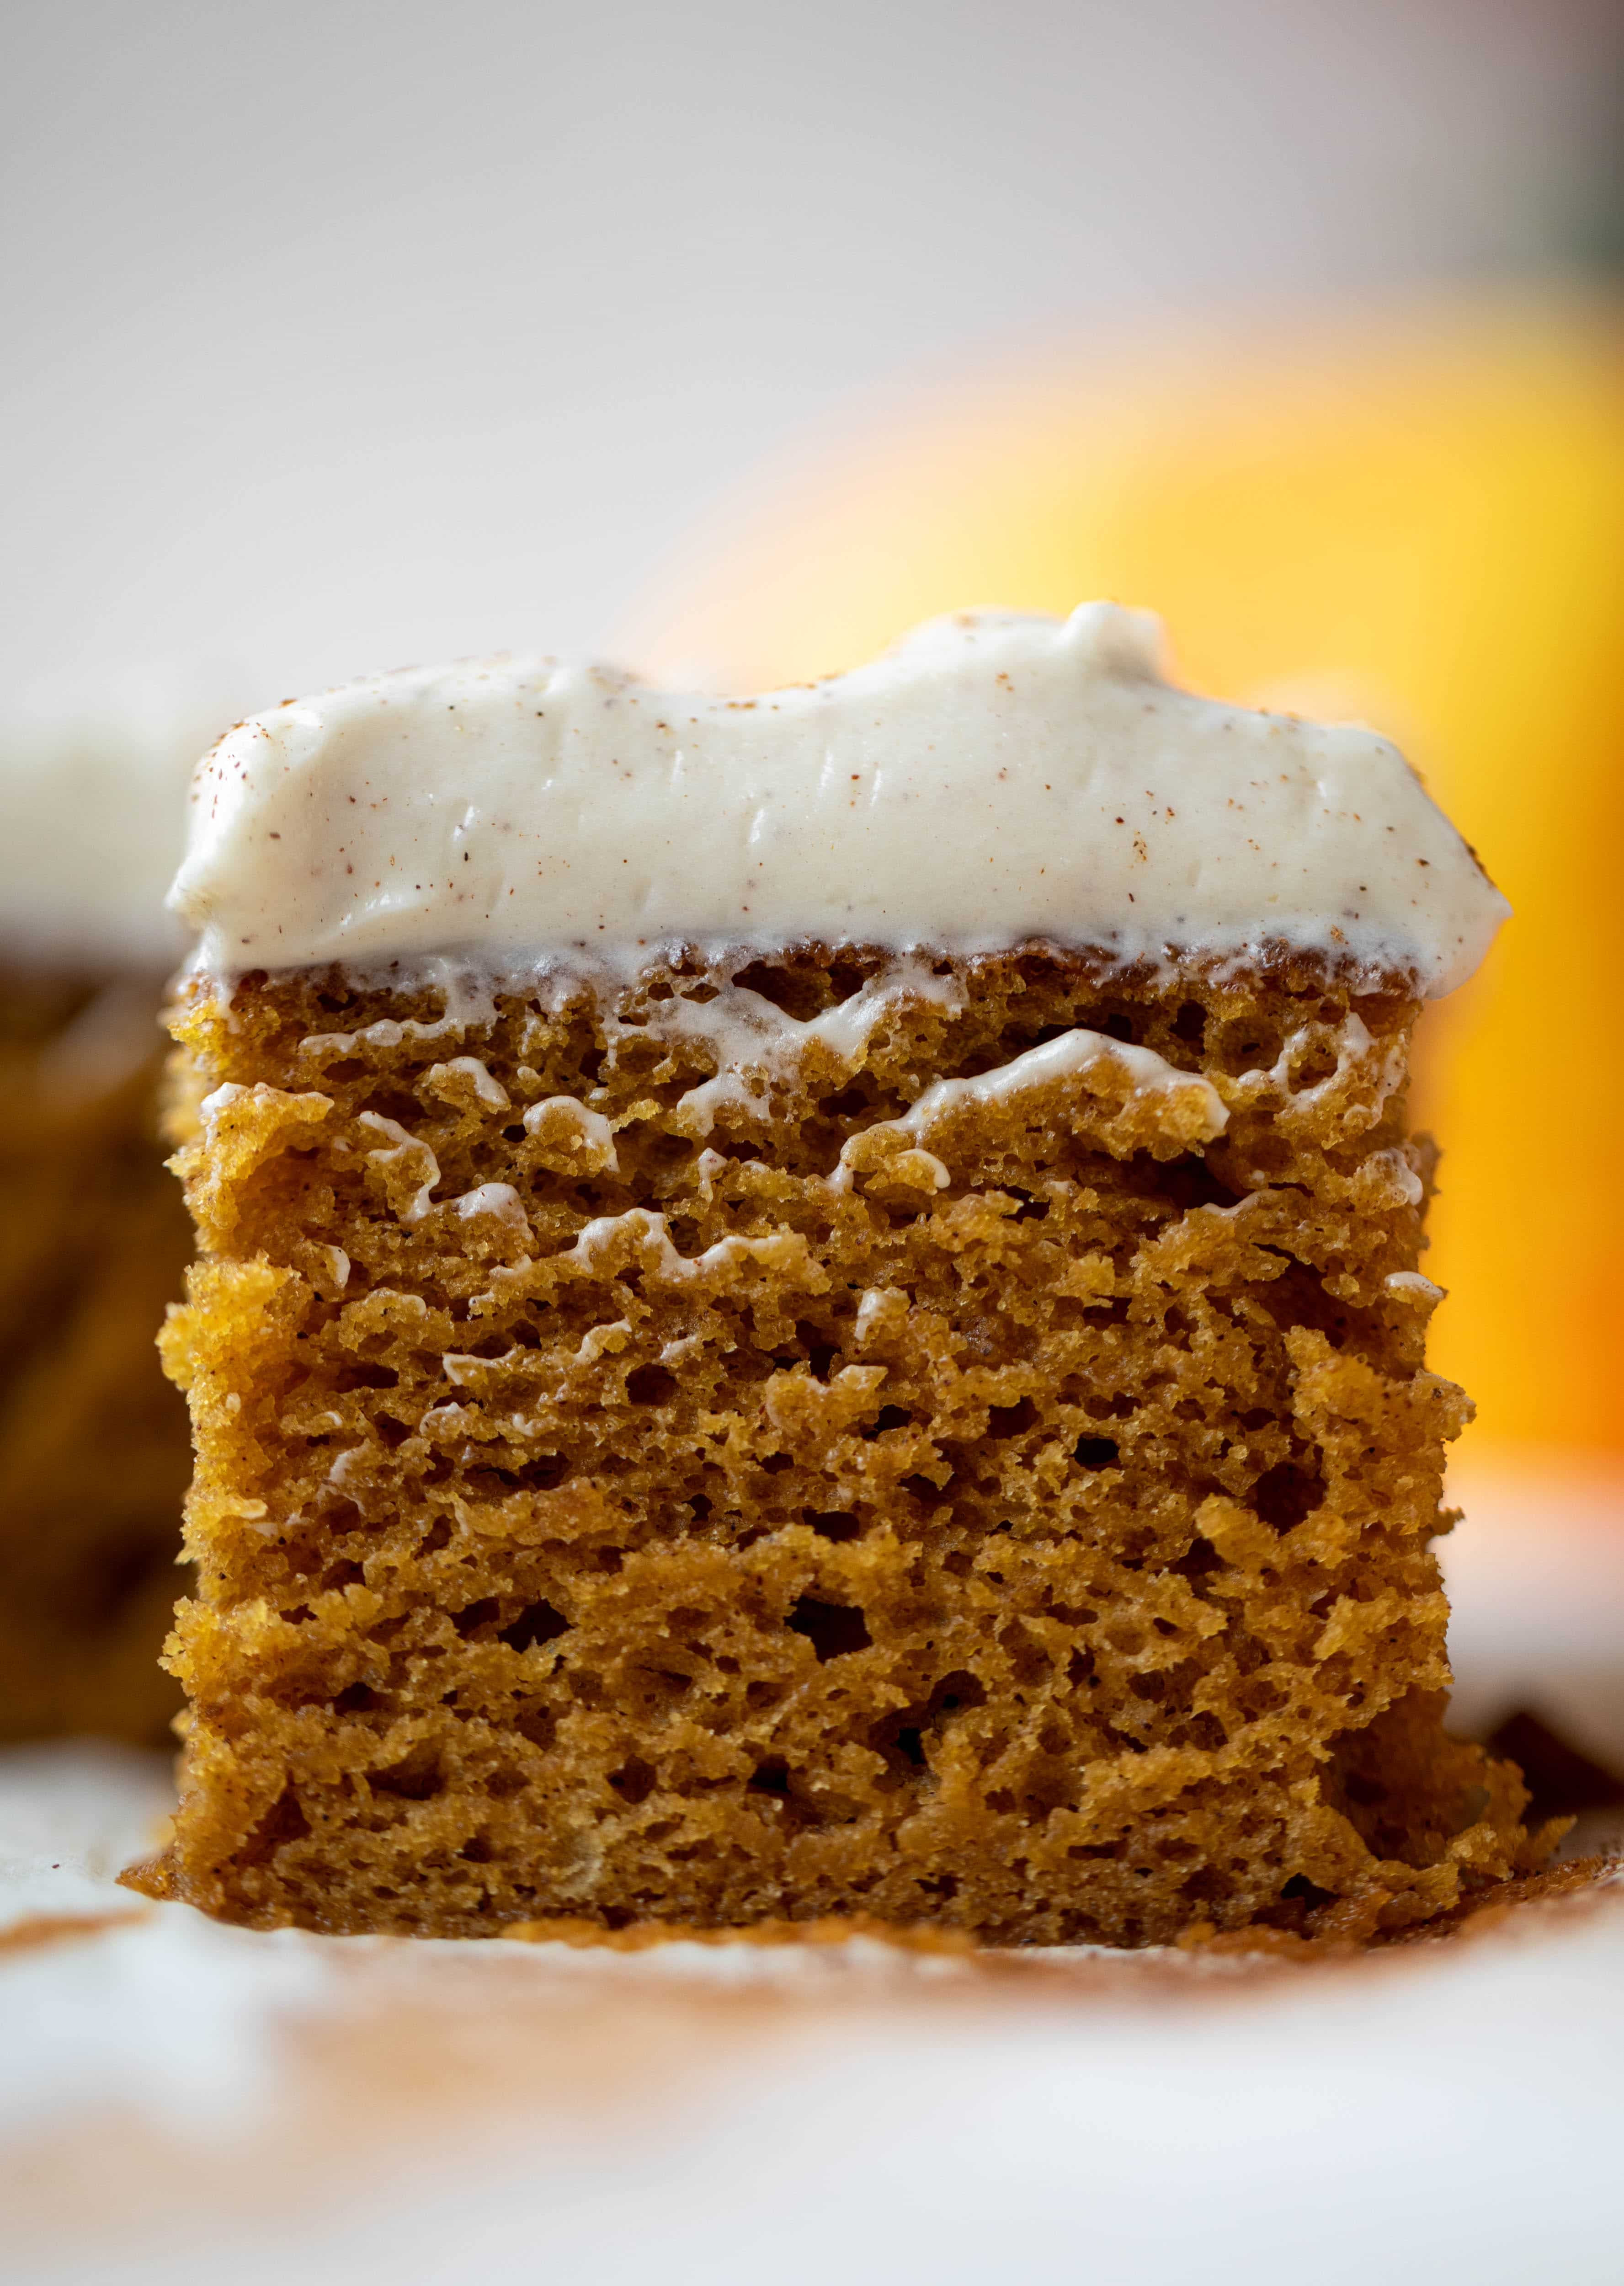 This Heavenly Spiced Carrot Cake is a Must-Try for Spice Lovers!